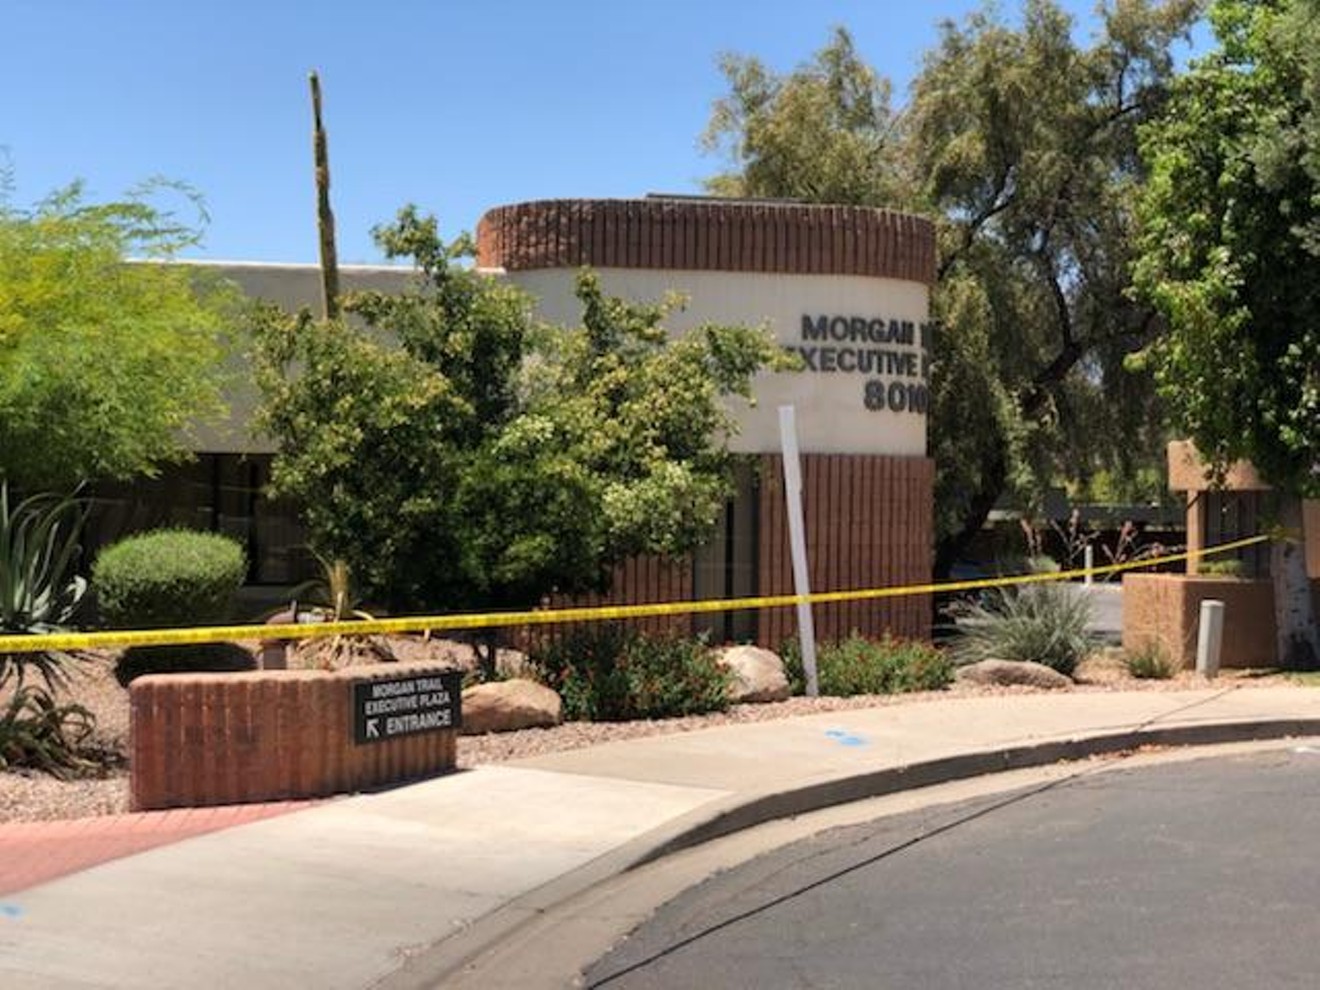 Police restricted access to an office near Mountain View Road in Scottsdale on Saturday.